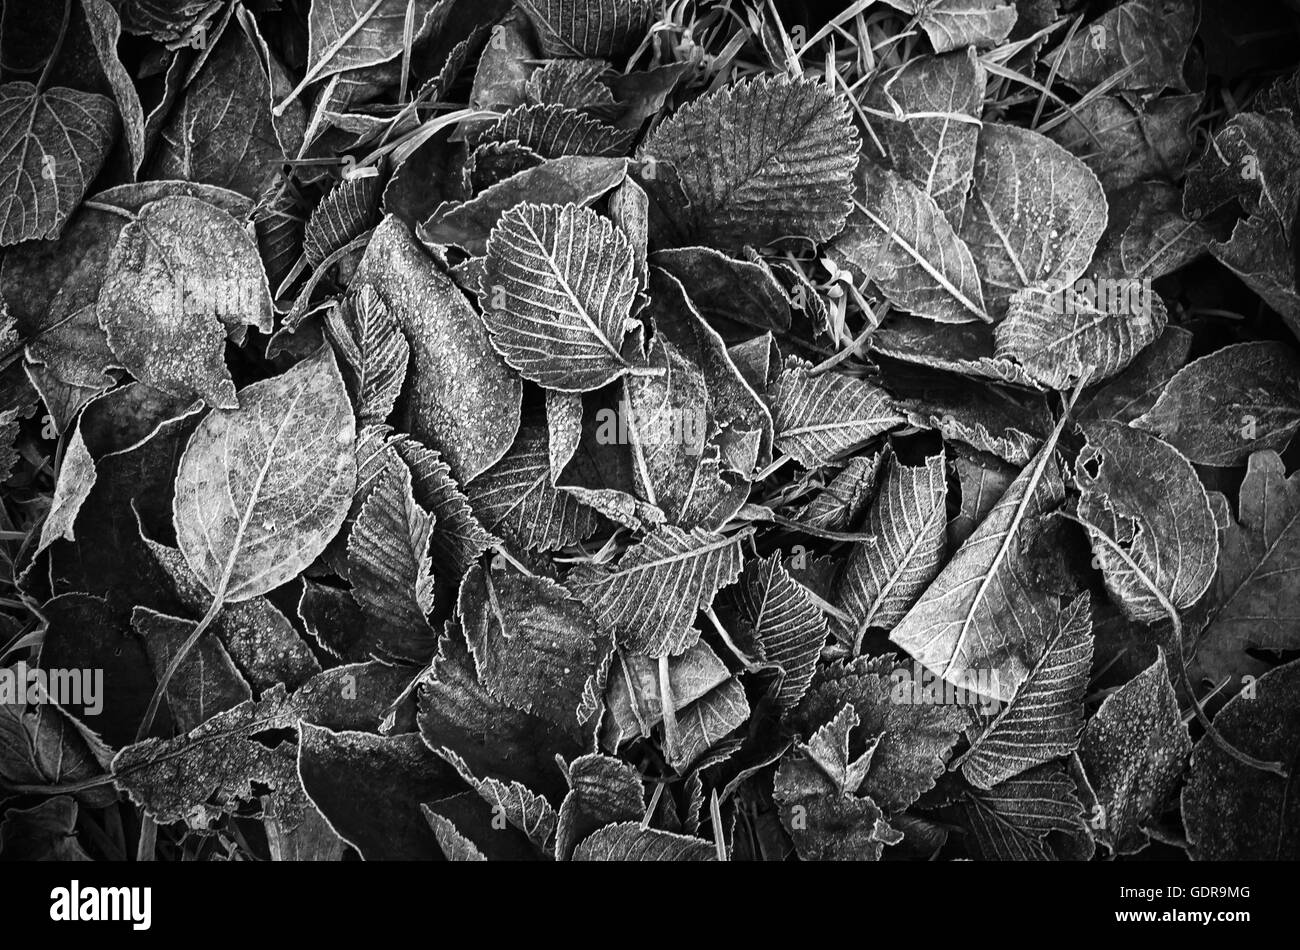 Fallen autumnal leaves lay on the ground, black and white background photo texture Stock Photo